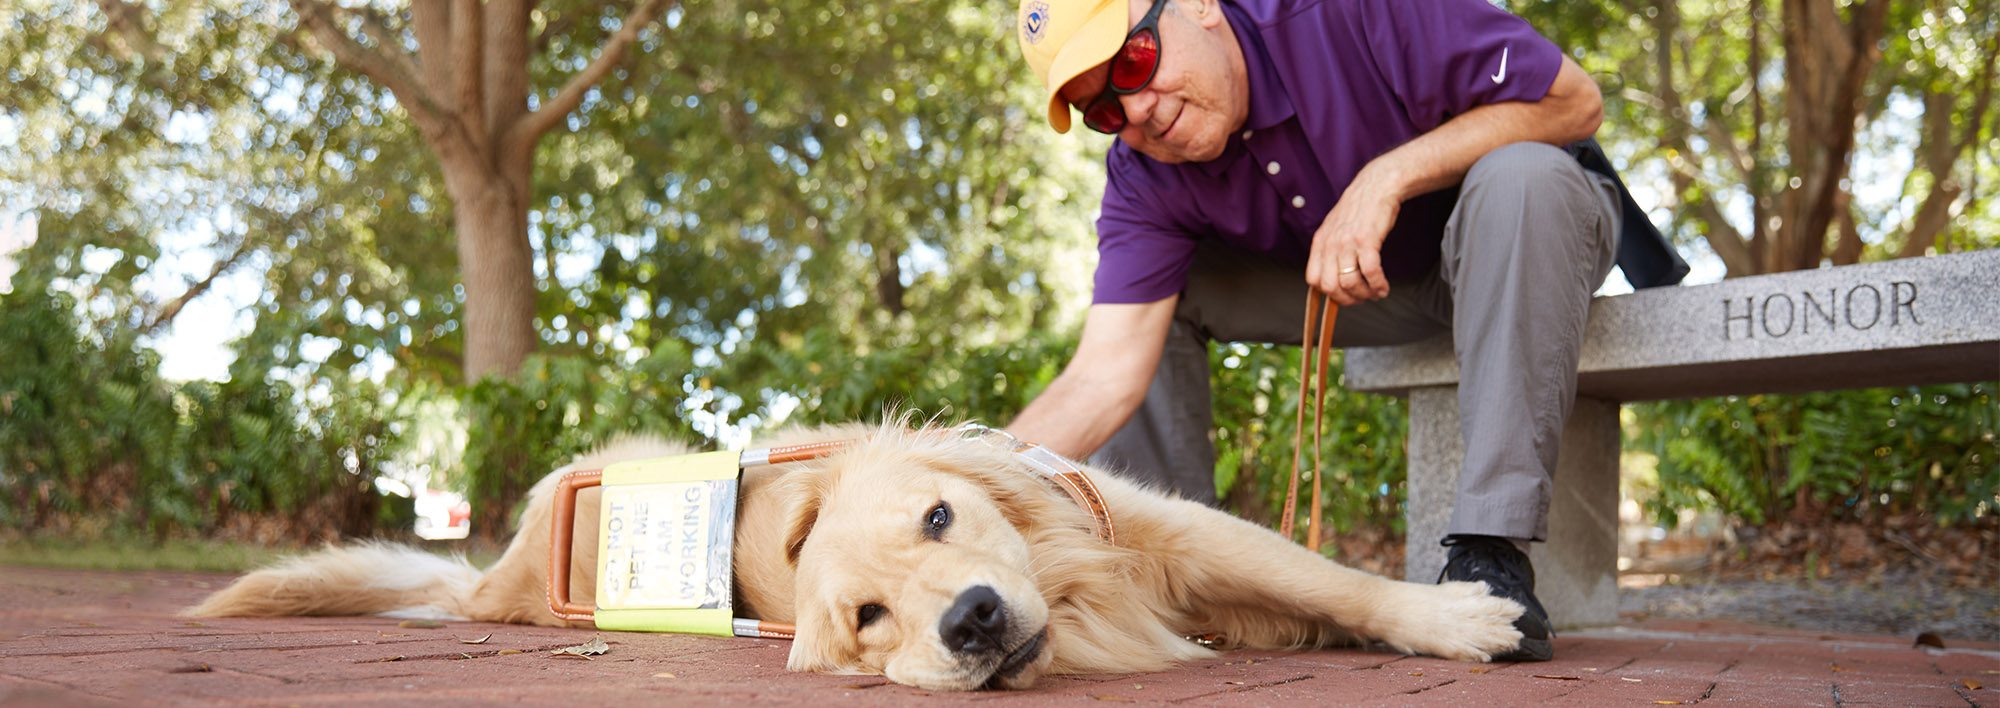 An older man wearing a yellow Lions club baseball cap sits on a outdoor bench on a sunny day. He is leaning over and petting a golden retriever in harness, who is lying on a brick pathway in front of the bench